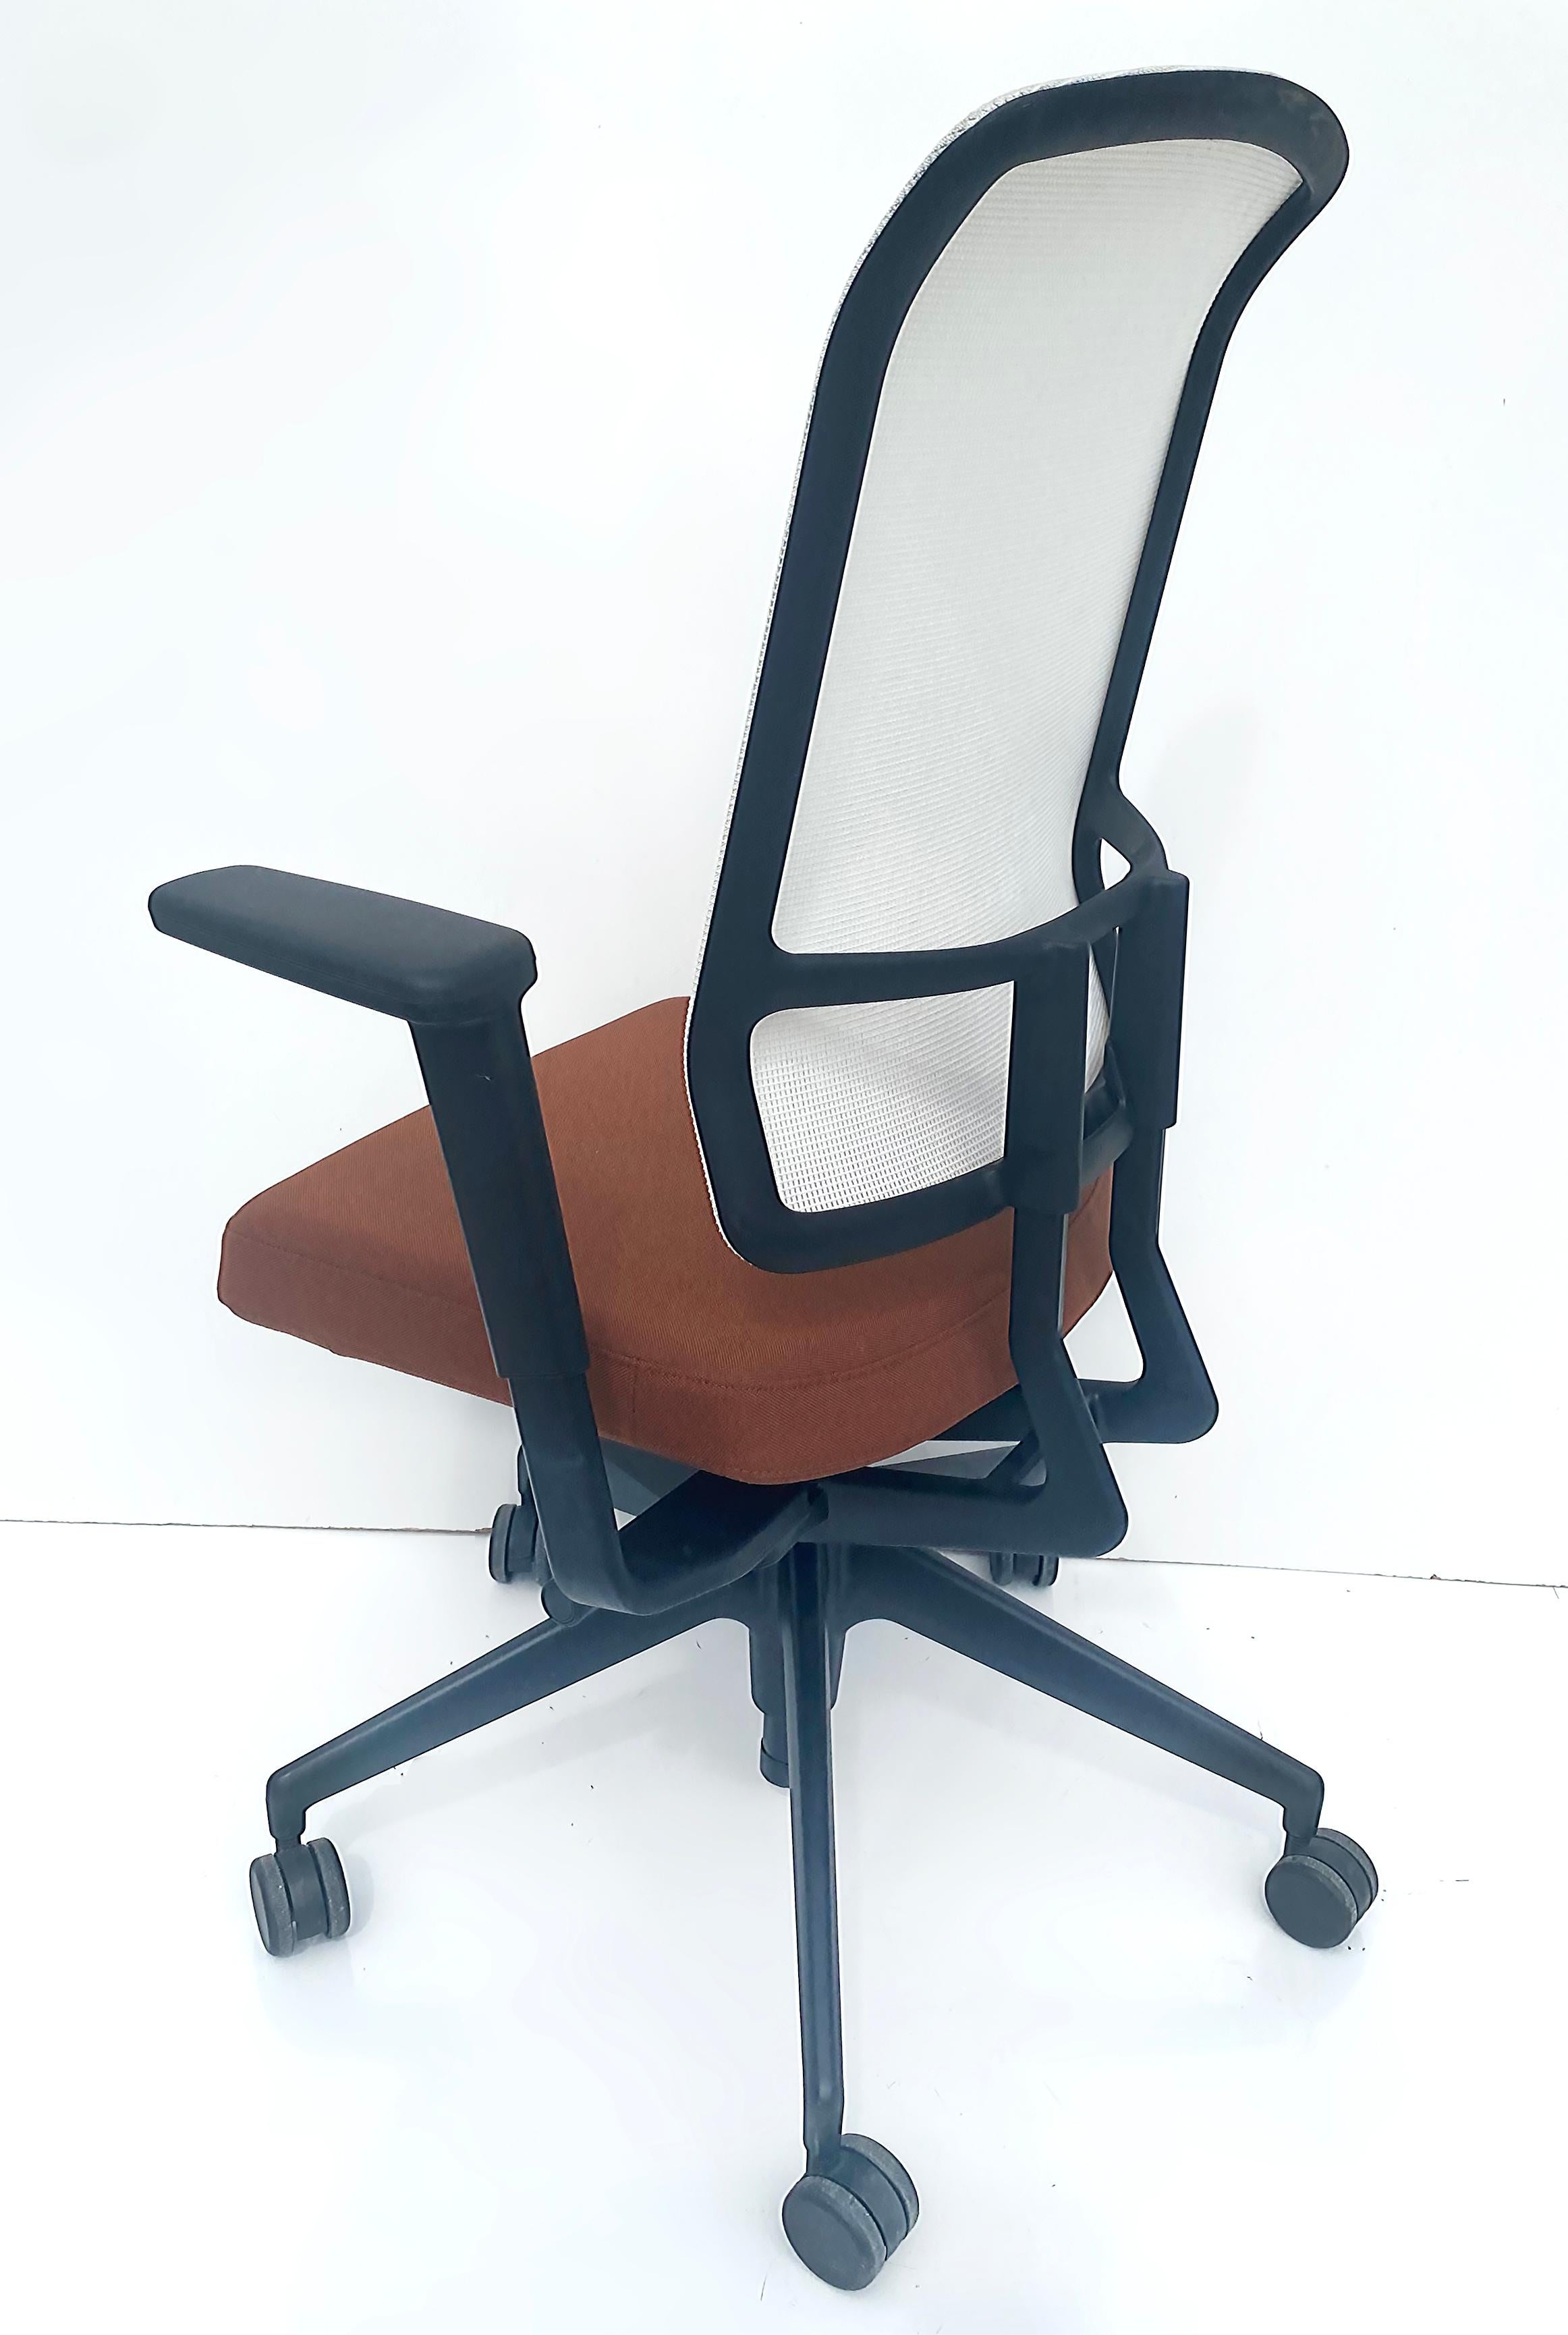 Vitra AM Fully Adjustable Ergonomic Office Chairs by Alberto Meda 2021 For Sale 1